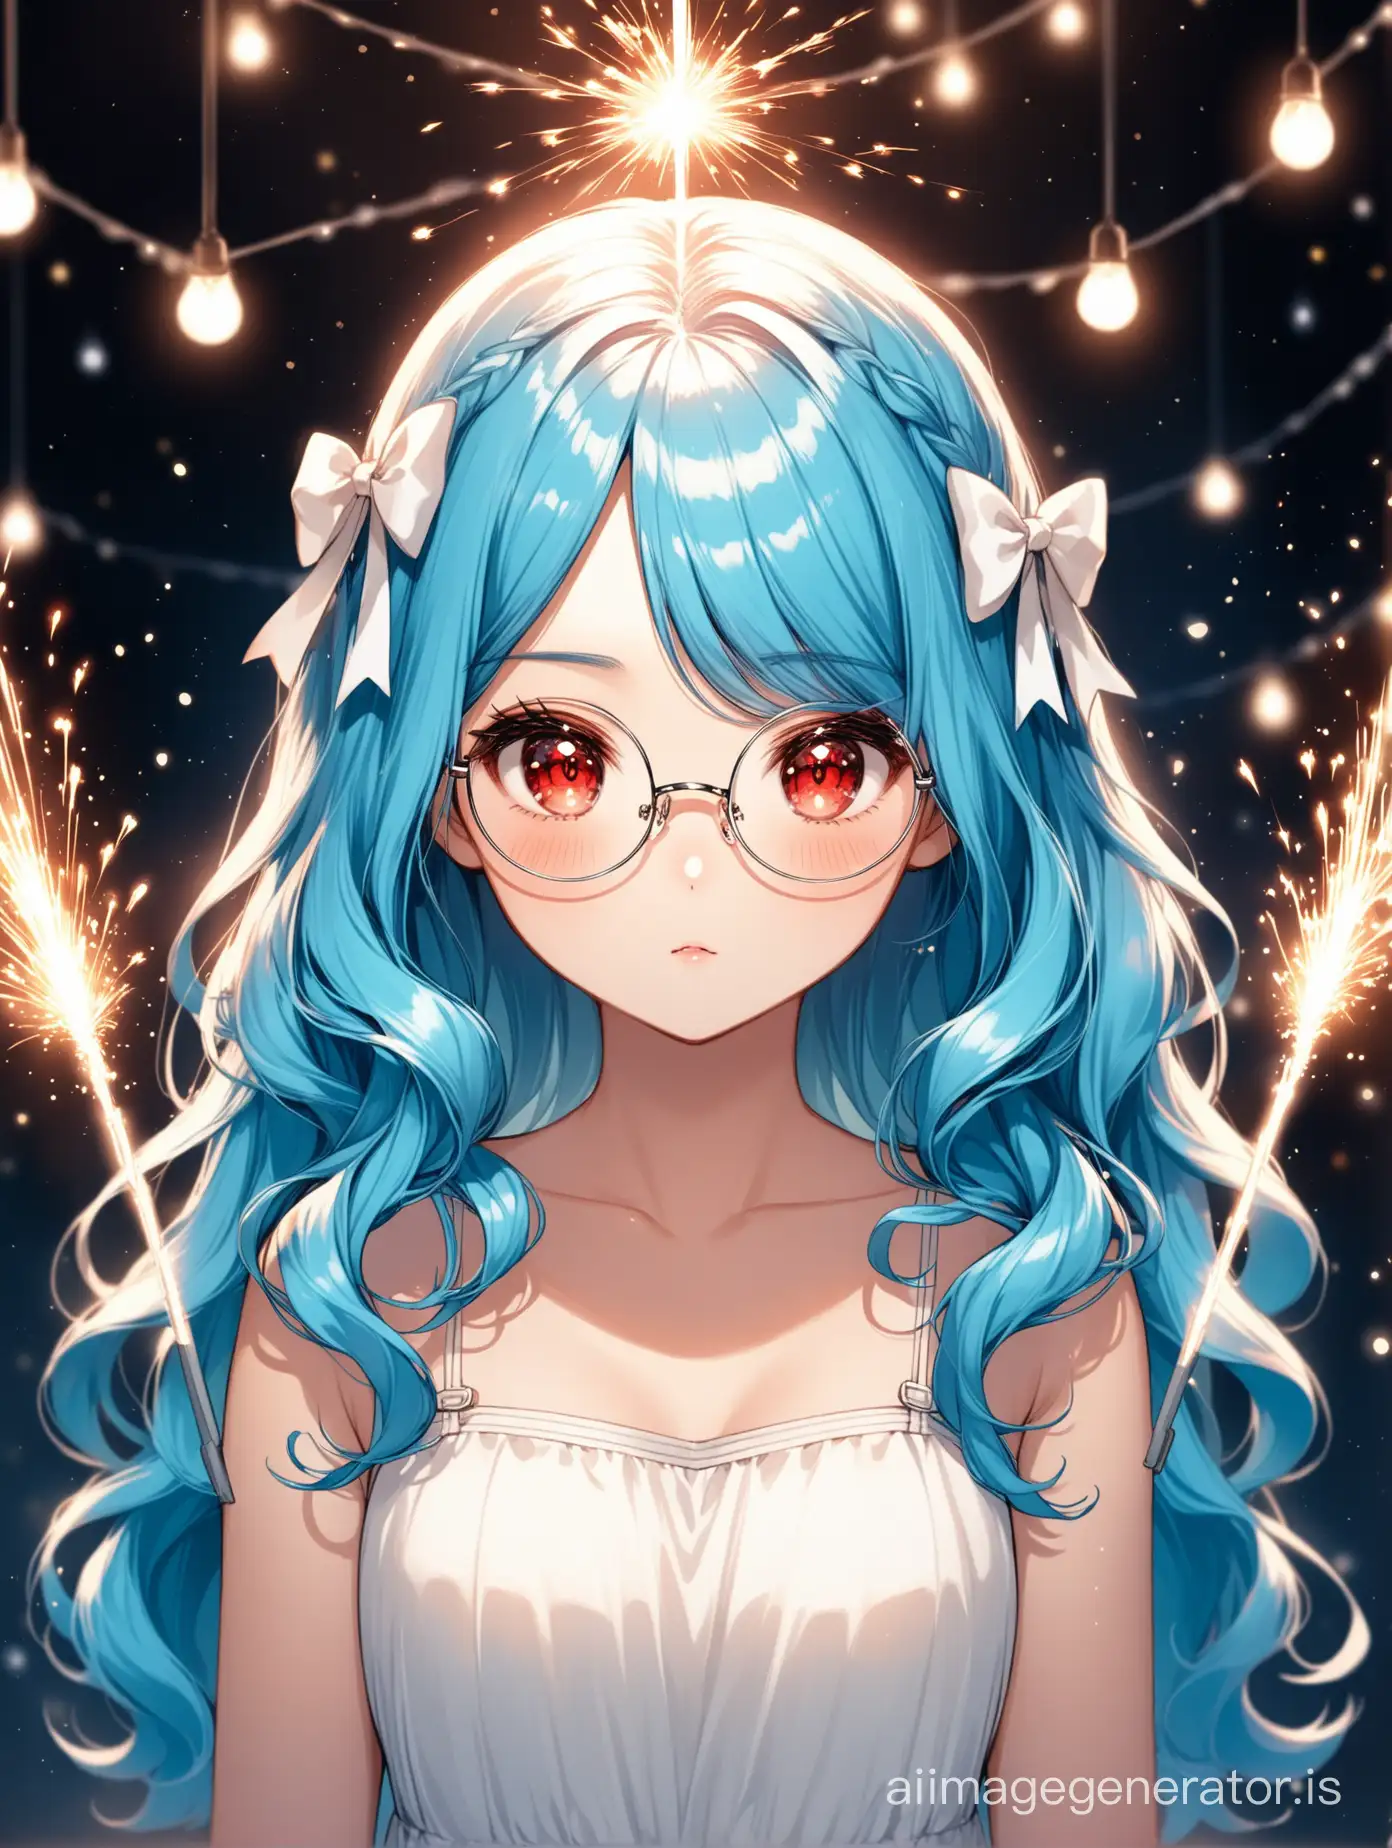 The girl with blue hair, her hair shines red, she has red eyes, wears large round glasses, in a beautiful black and white dress, her hair is slightly curly, there are 2 cute white ribbons on her head, in the background there are a few lights resembling sparks